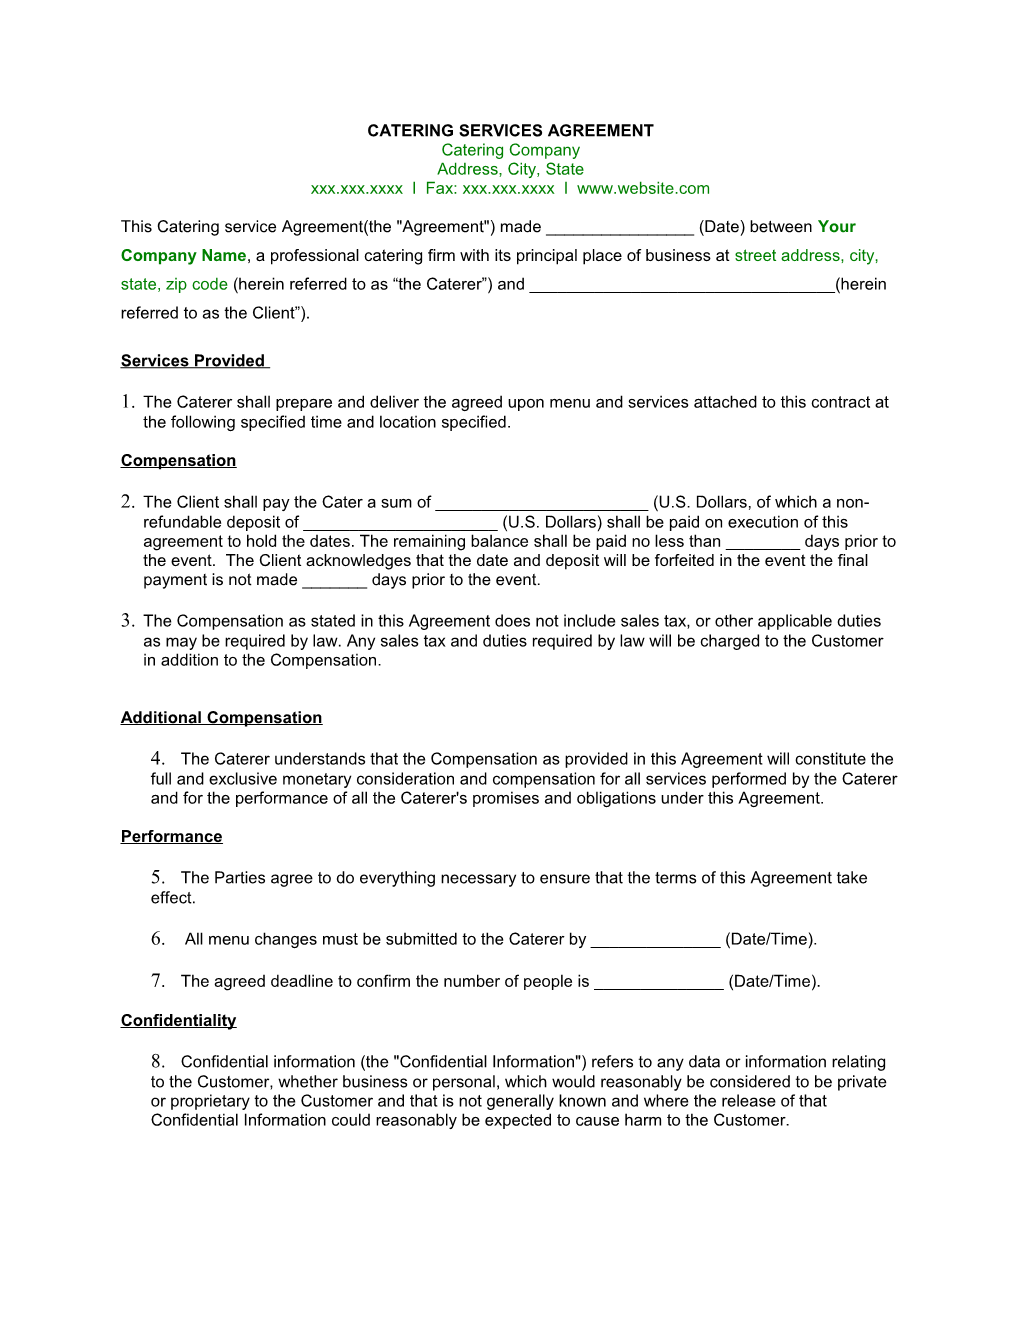 Catering Services Agreement